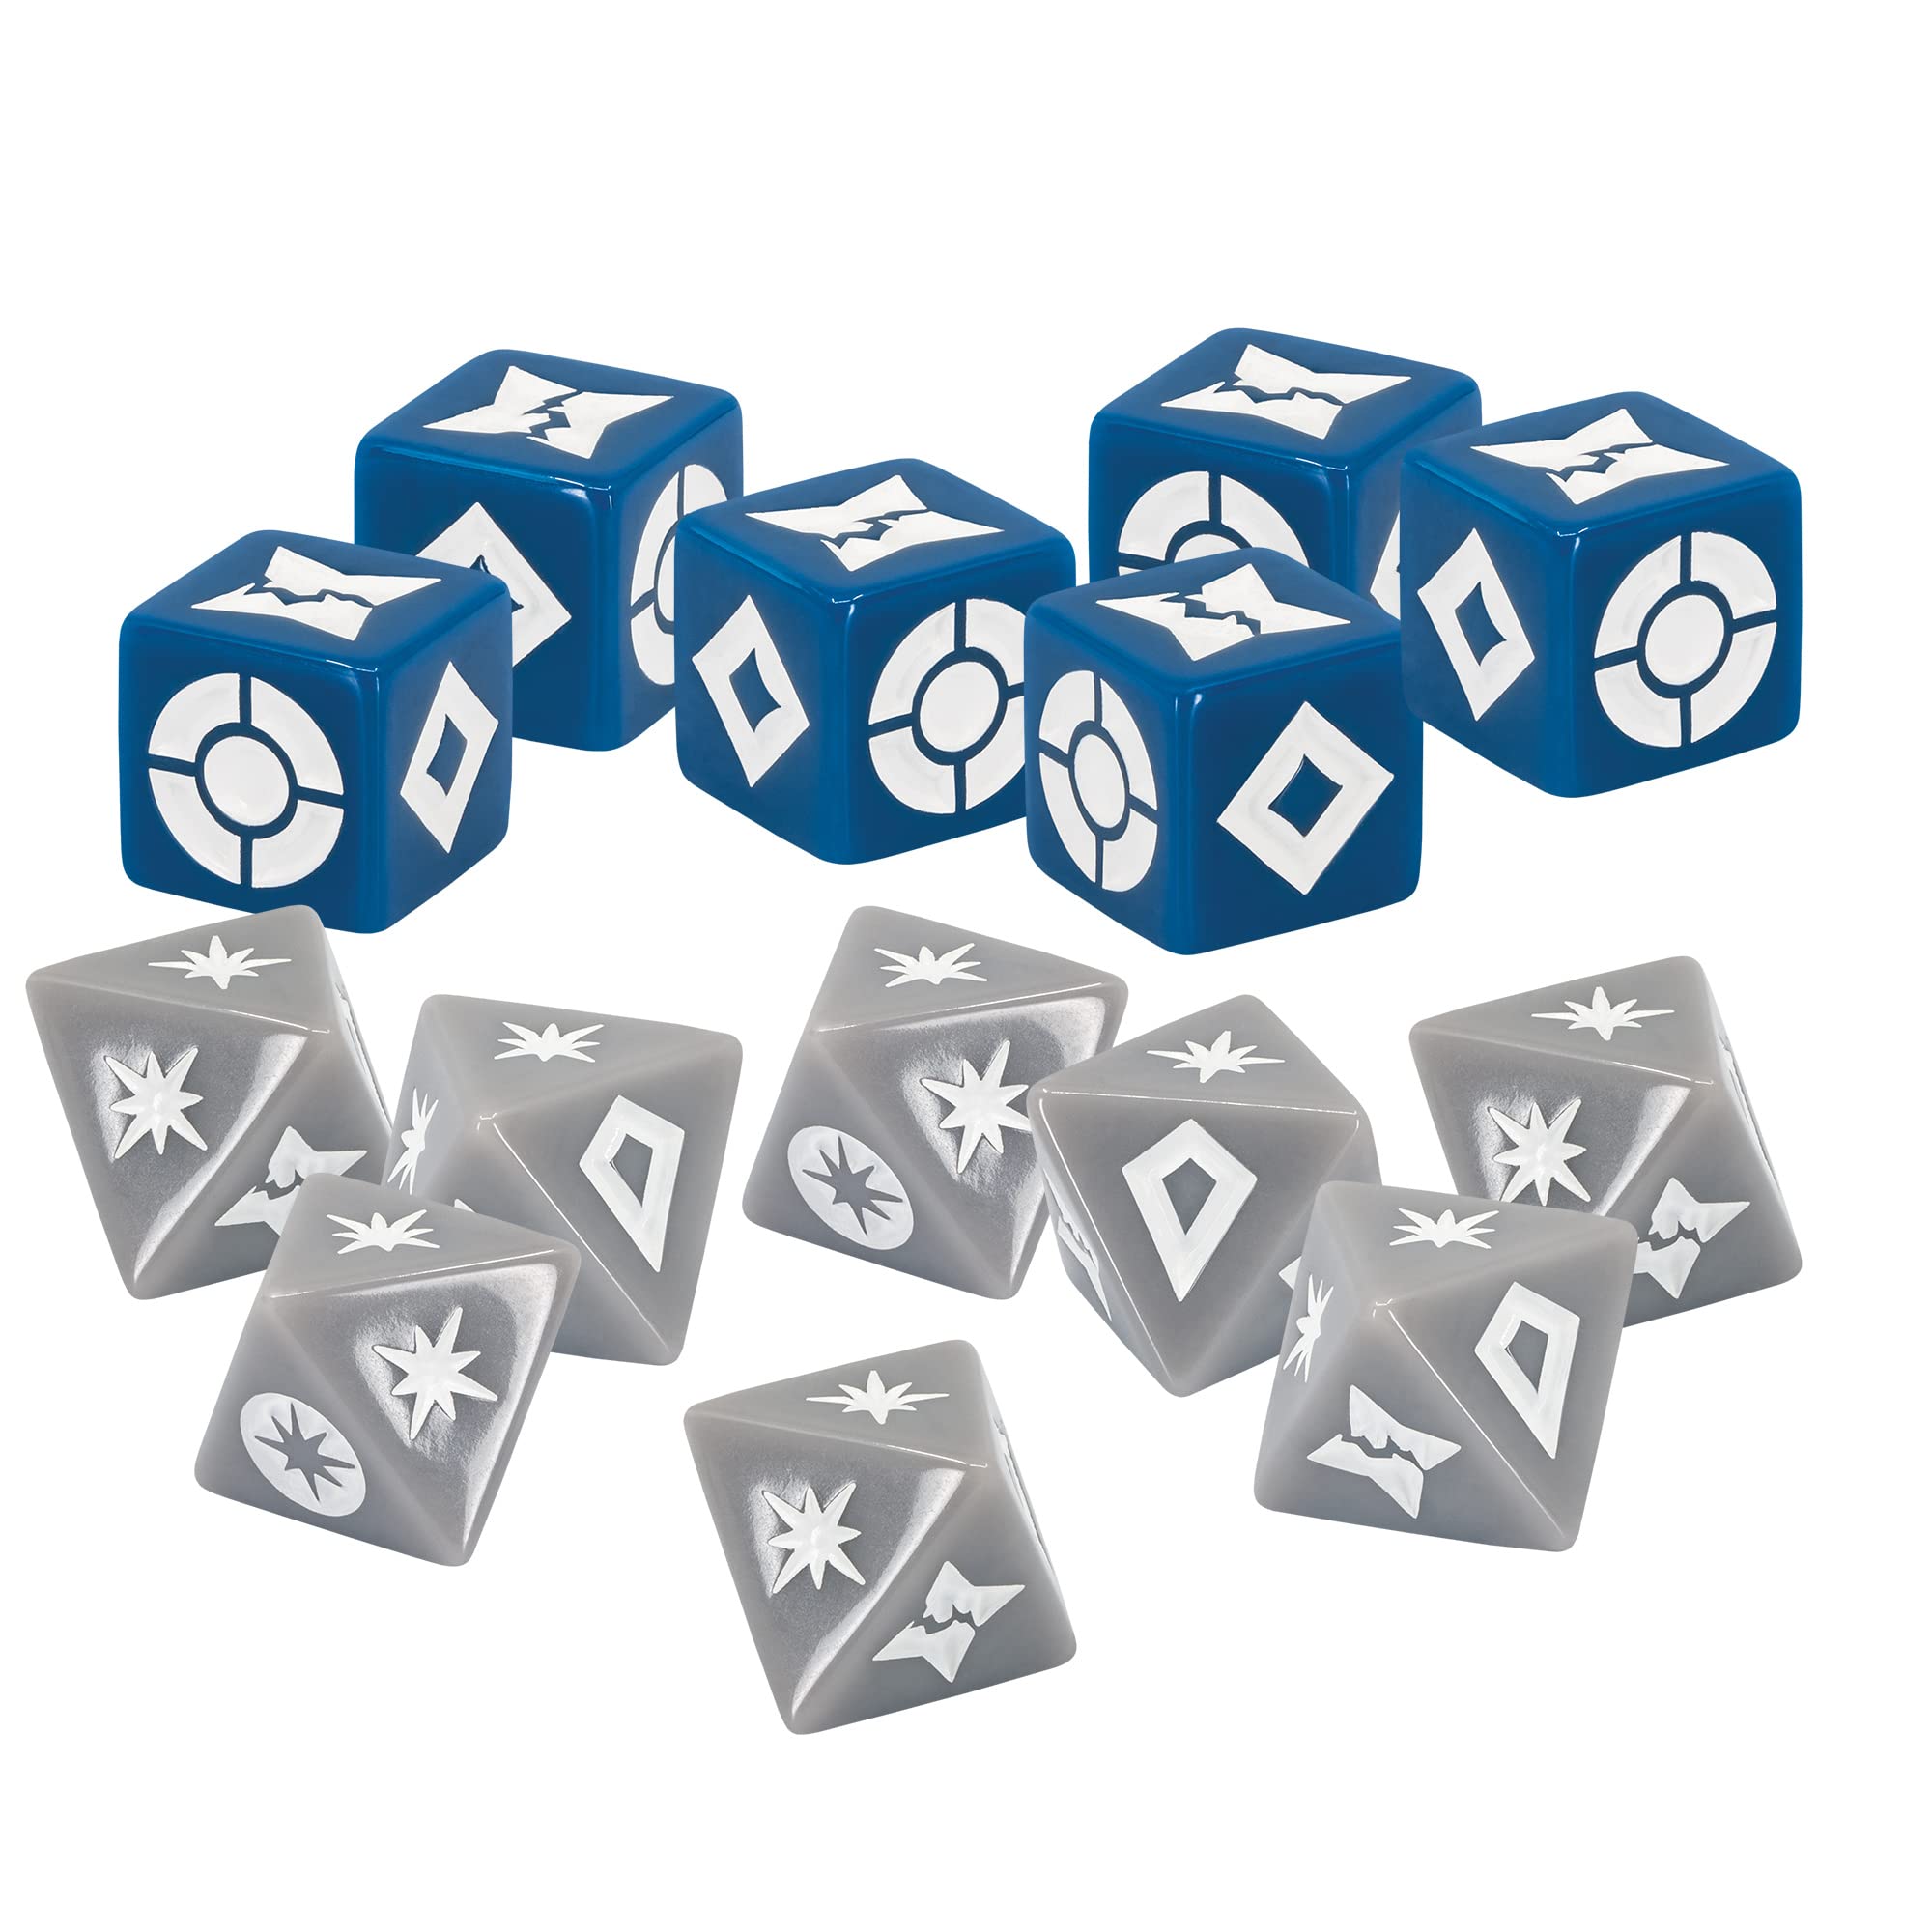 Star Wars Shatterpoint DICE Pack - Roll The Destiny of The Galaxy! Tabletop Miniatures Game, Strategy Game for Kids and Adults, Ages 14+, 2 Players, 90 Minute Playtime, Made by Atomic Mass Games